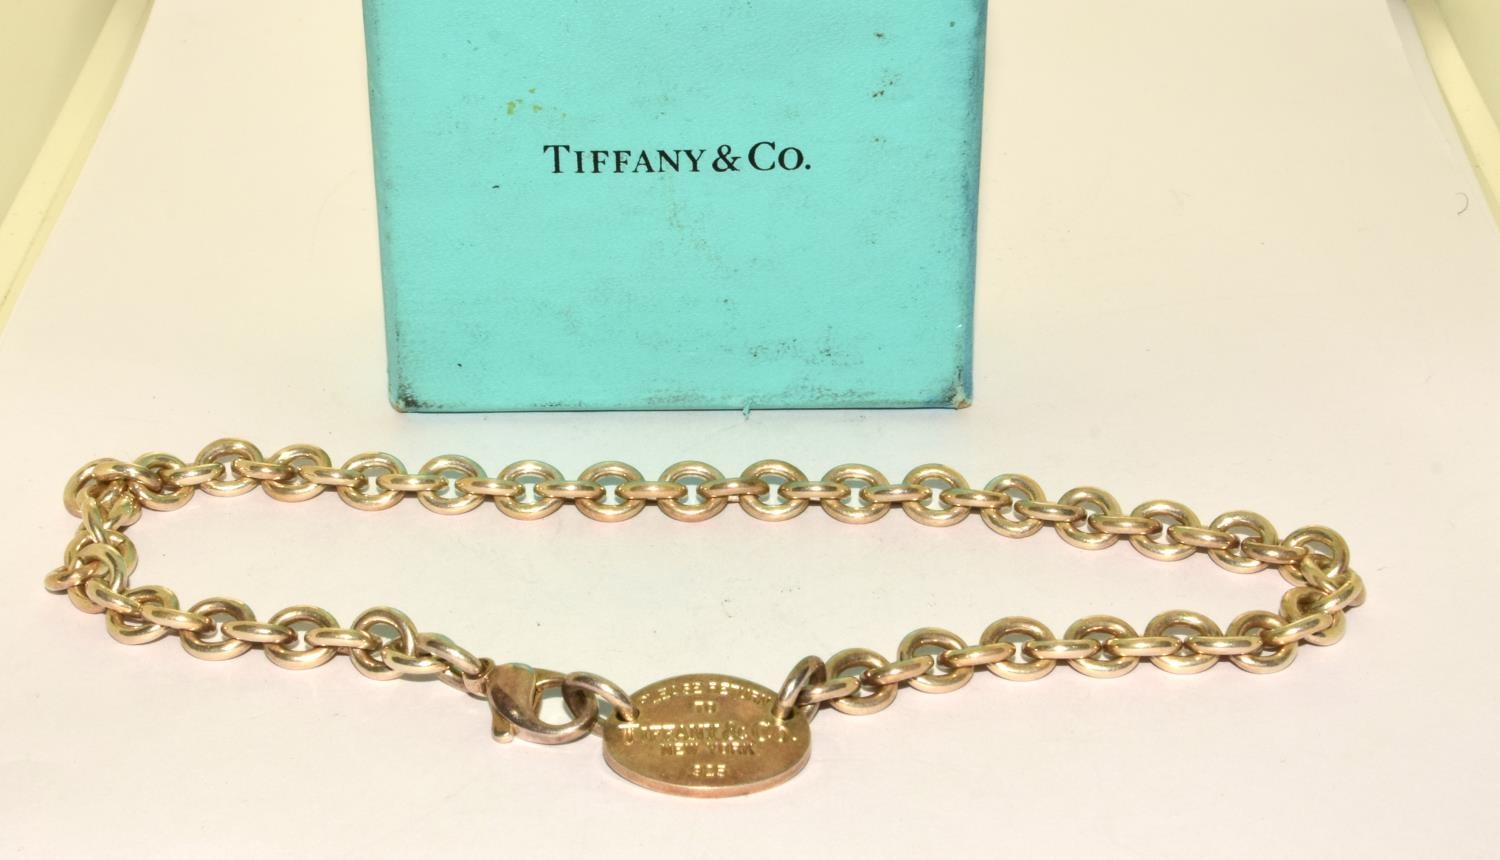 Tiffany & Co silver necklace, boxed.